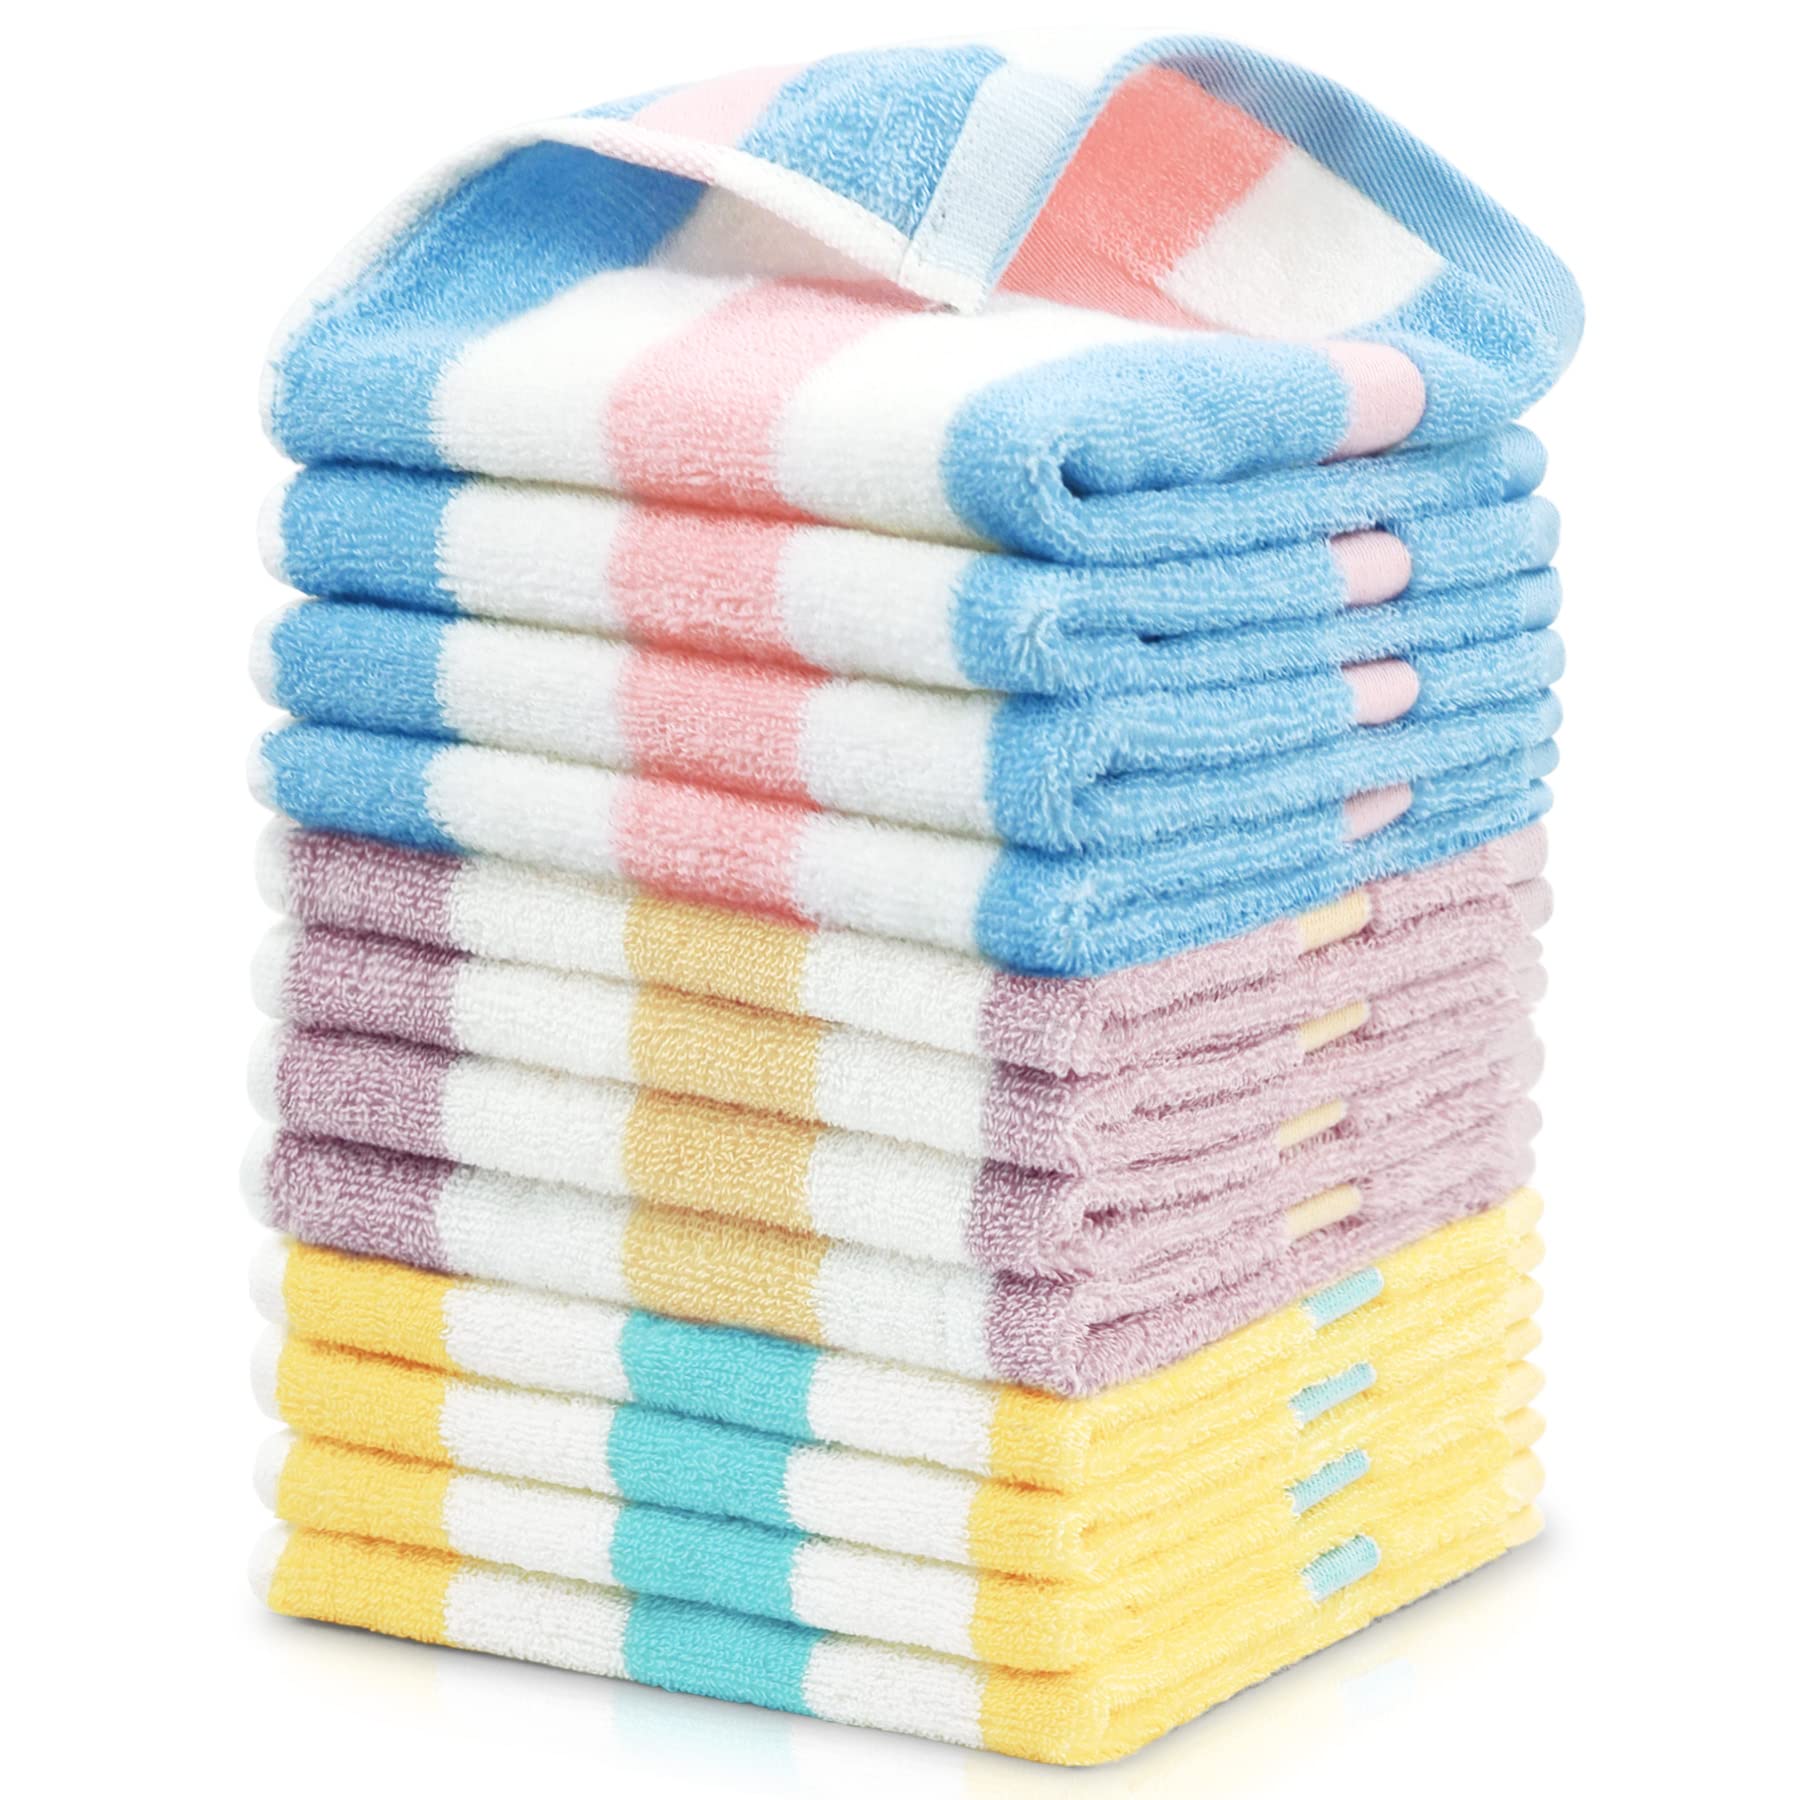 Striped Cotton Washcloths Small Towels Set, 12 Pack Bath